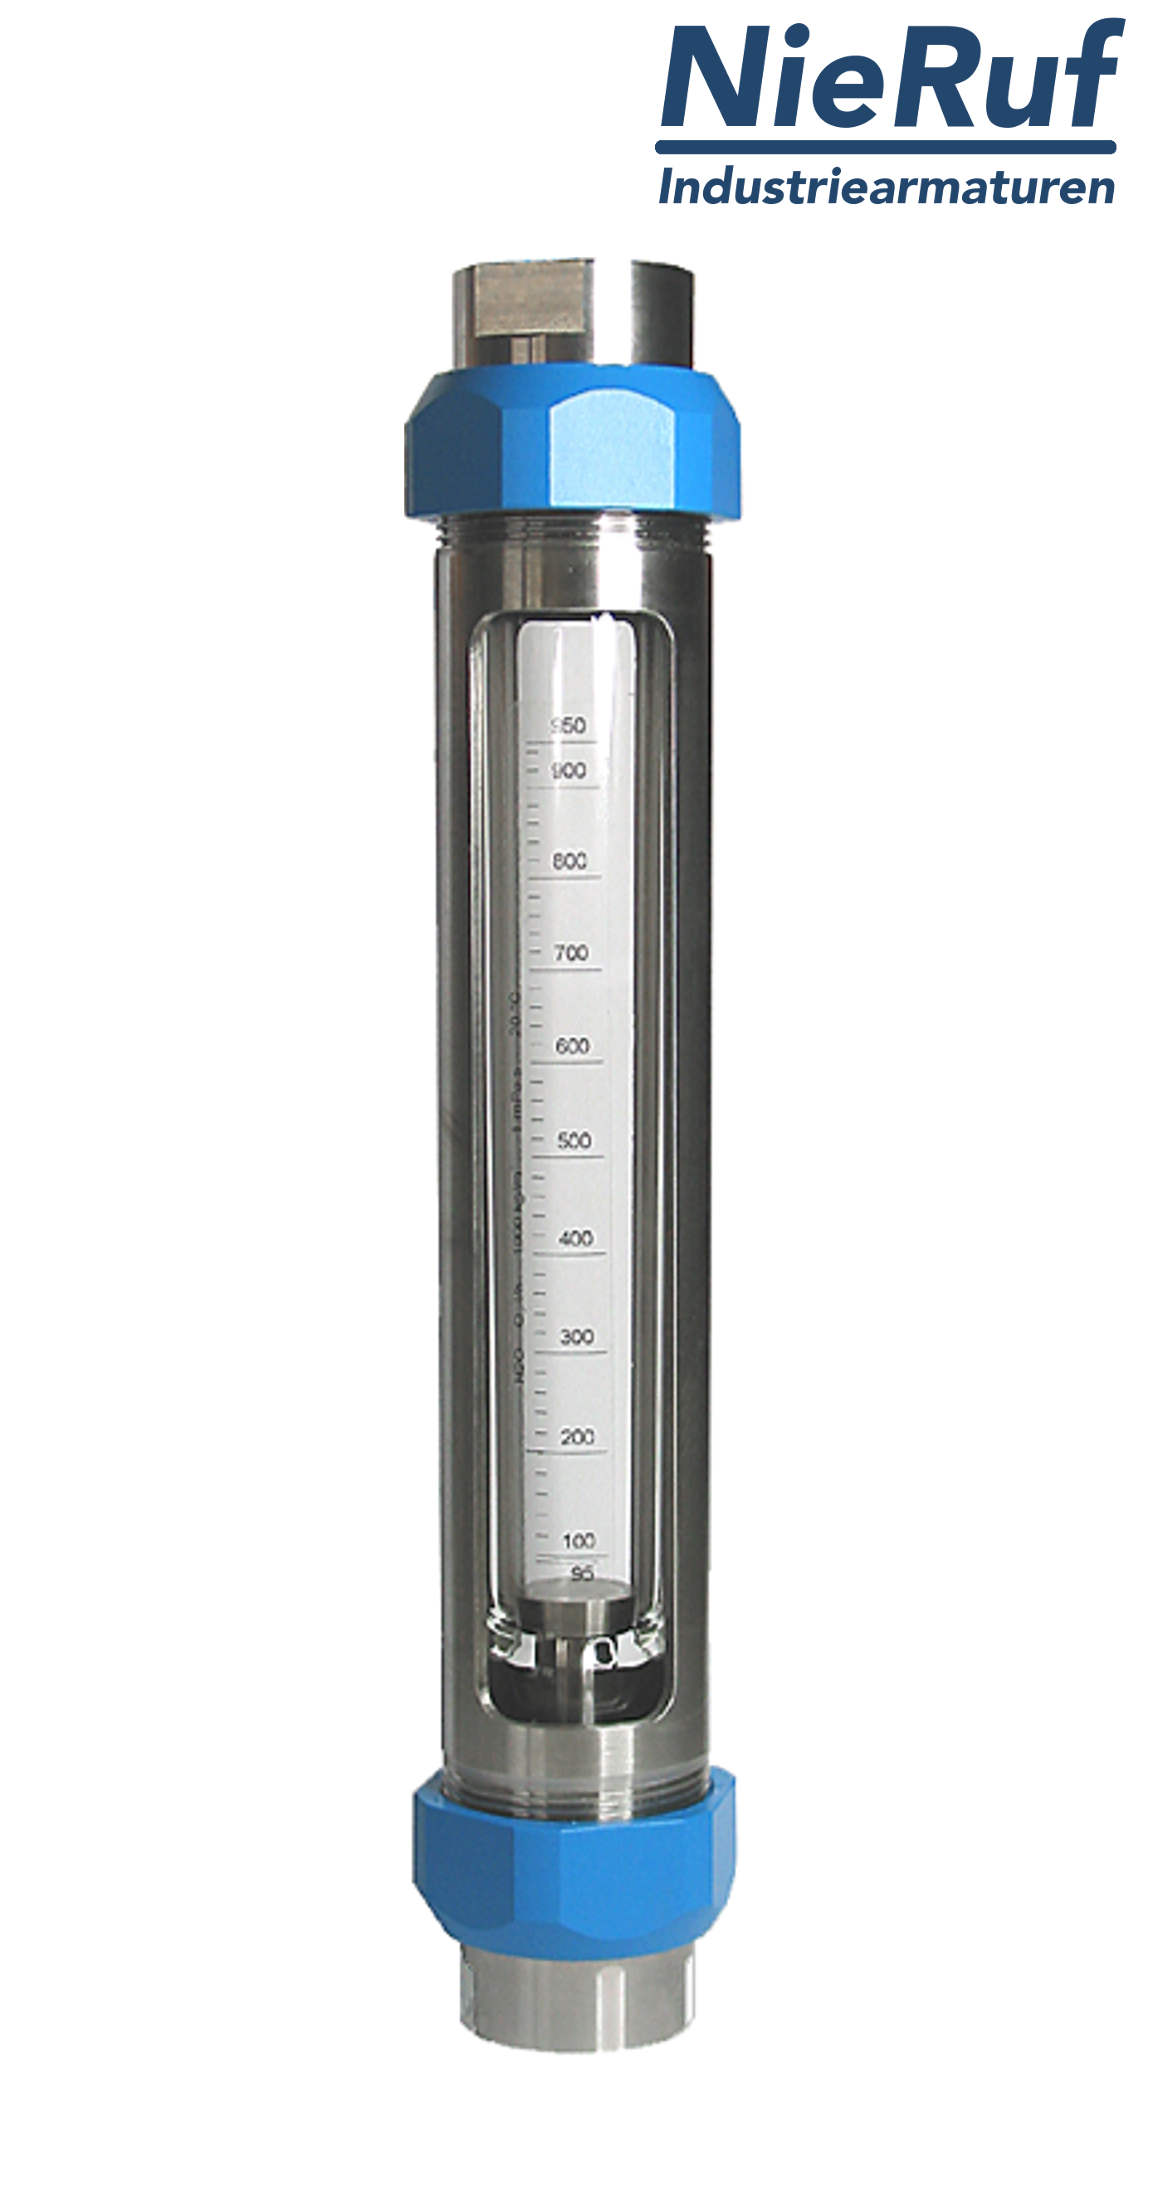 Variable area flowmeter stainless steel + borosilicate 1/2" inch 100.0 - 1000 l/h water EPDM